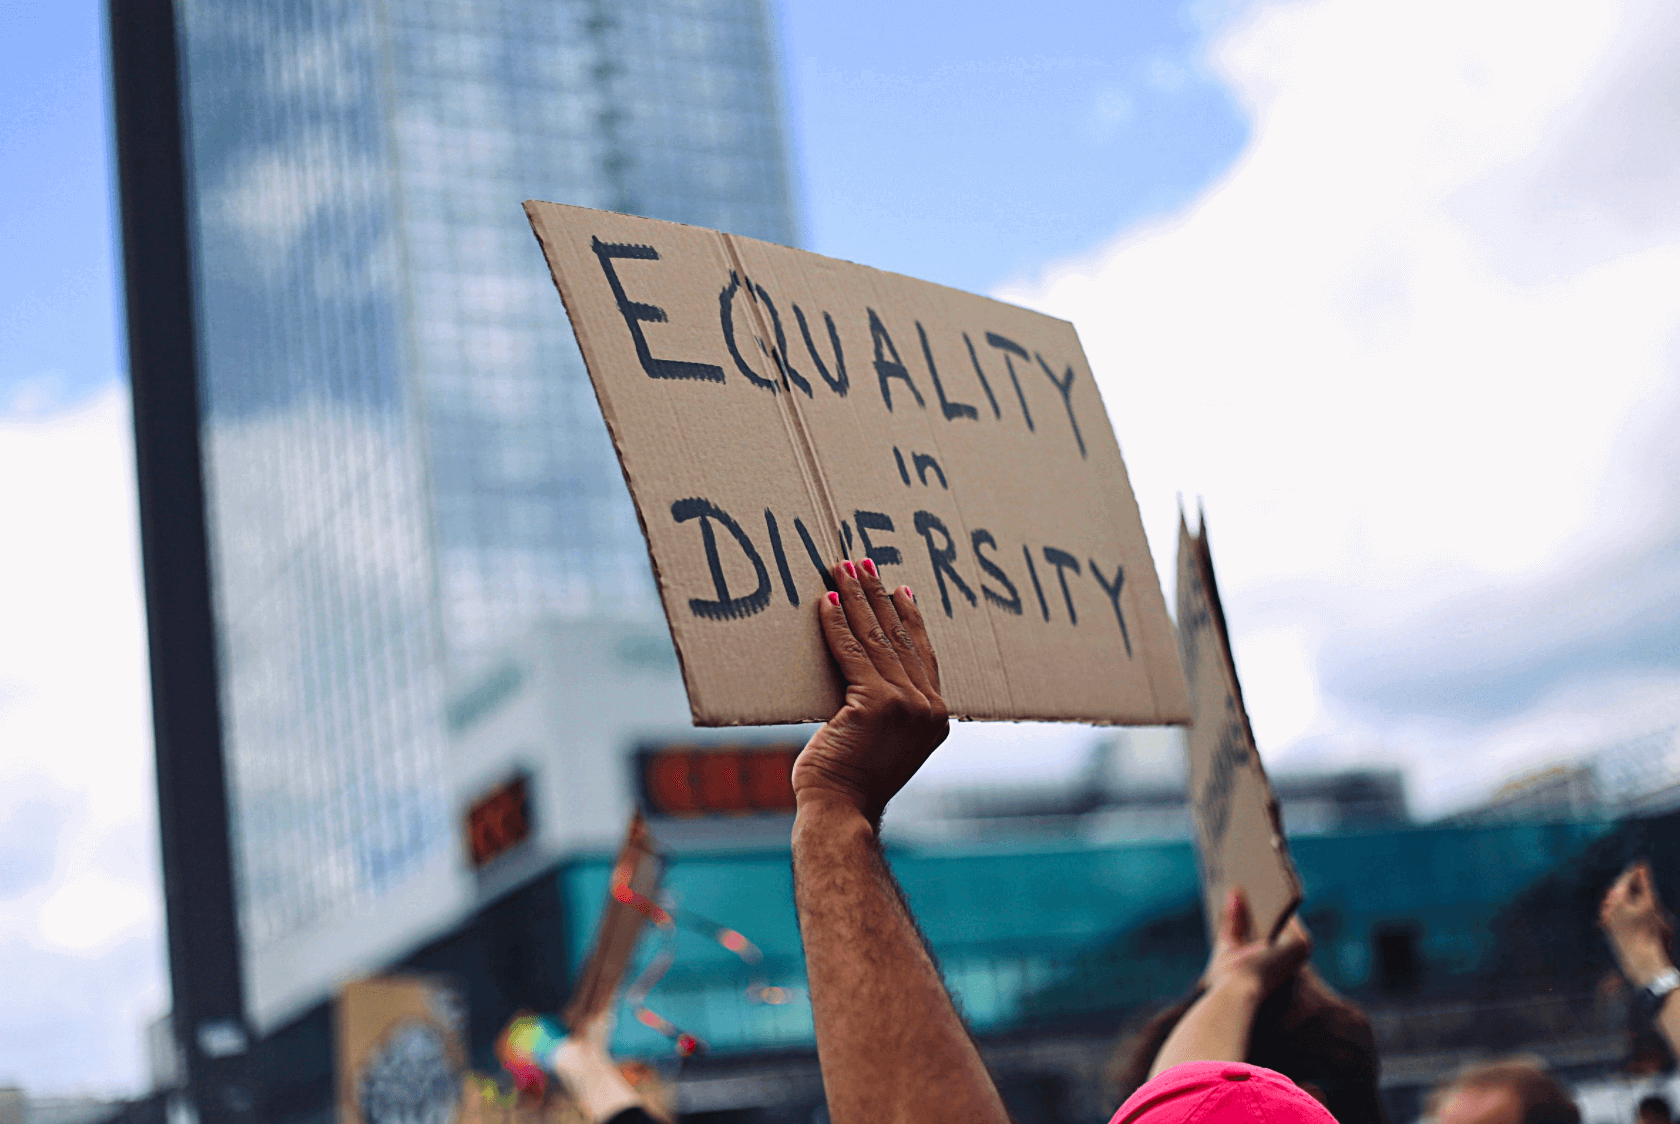 protest sign that says equality and diversity